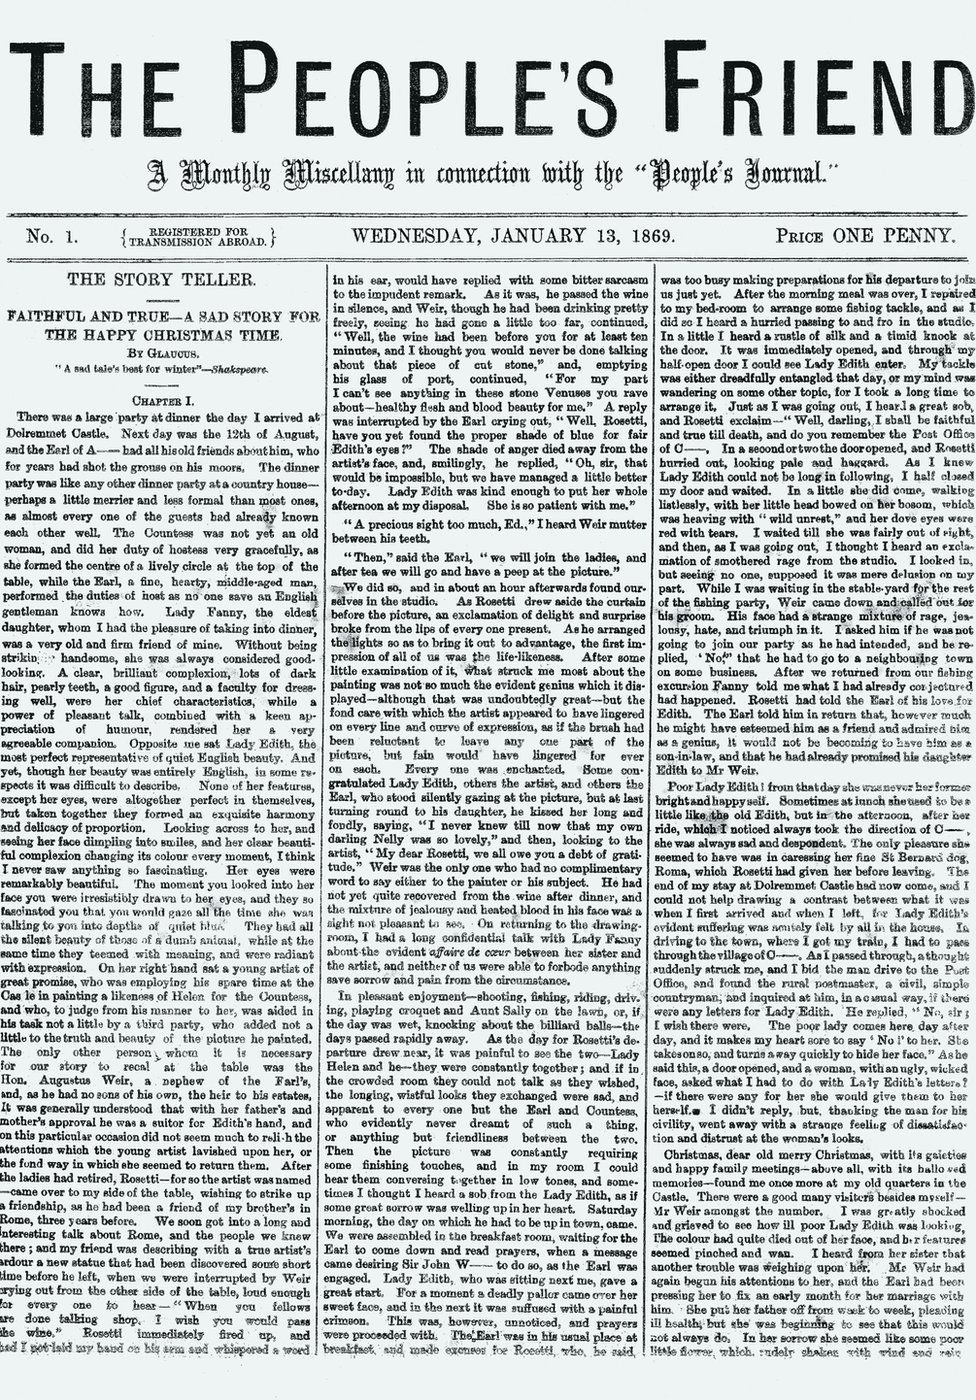 The first ever edition of the People's Friend in January 1869